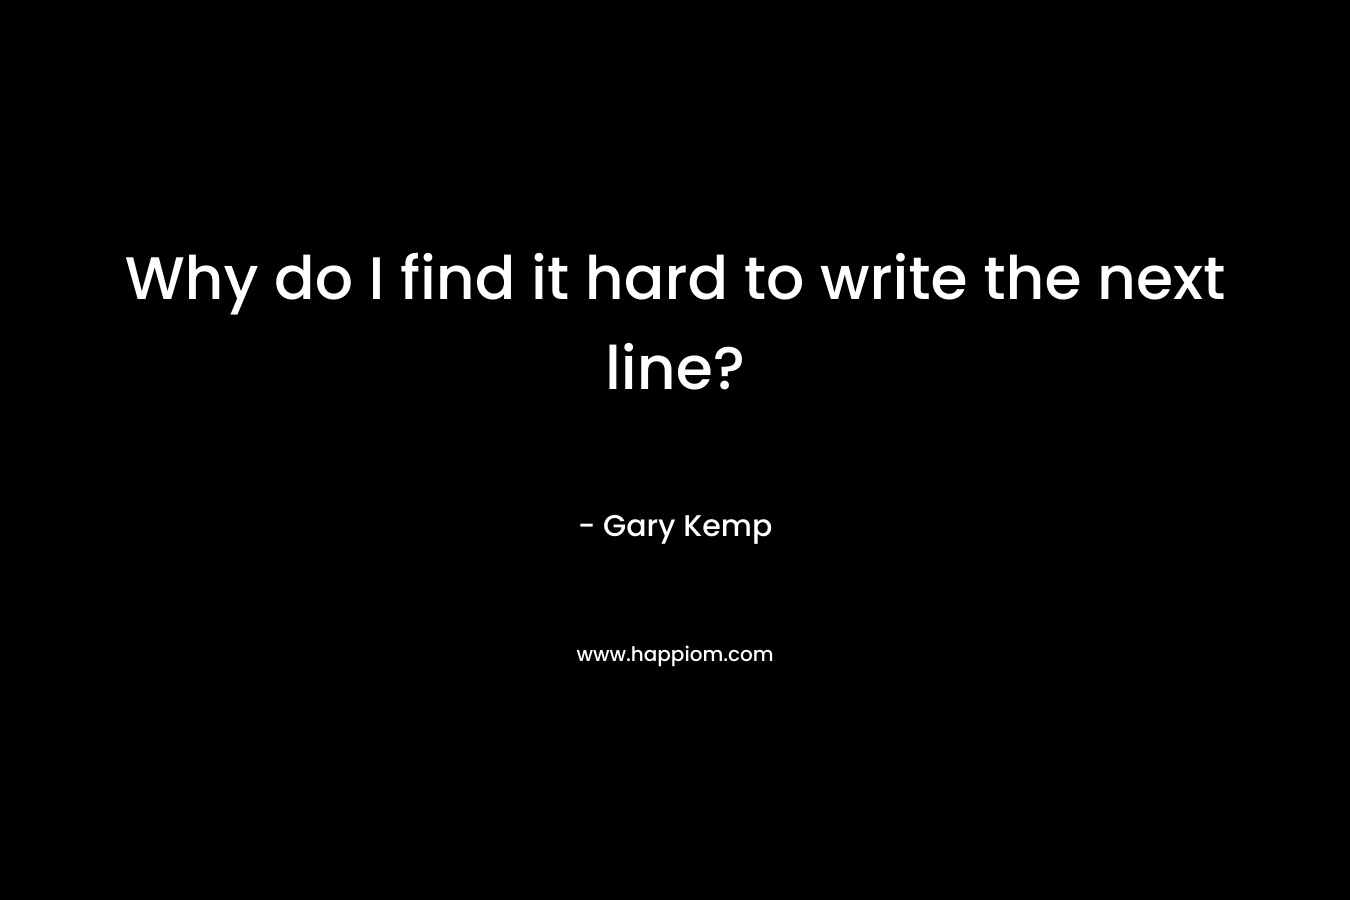 Why do I find it hard to write the next line? – Gary Kemp